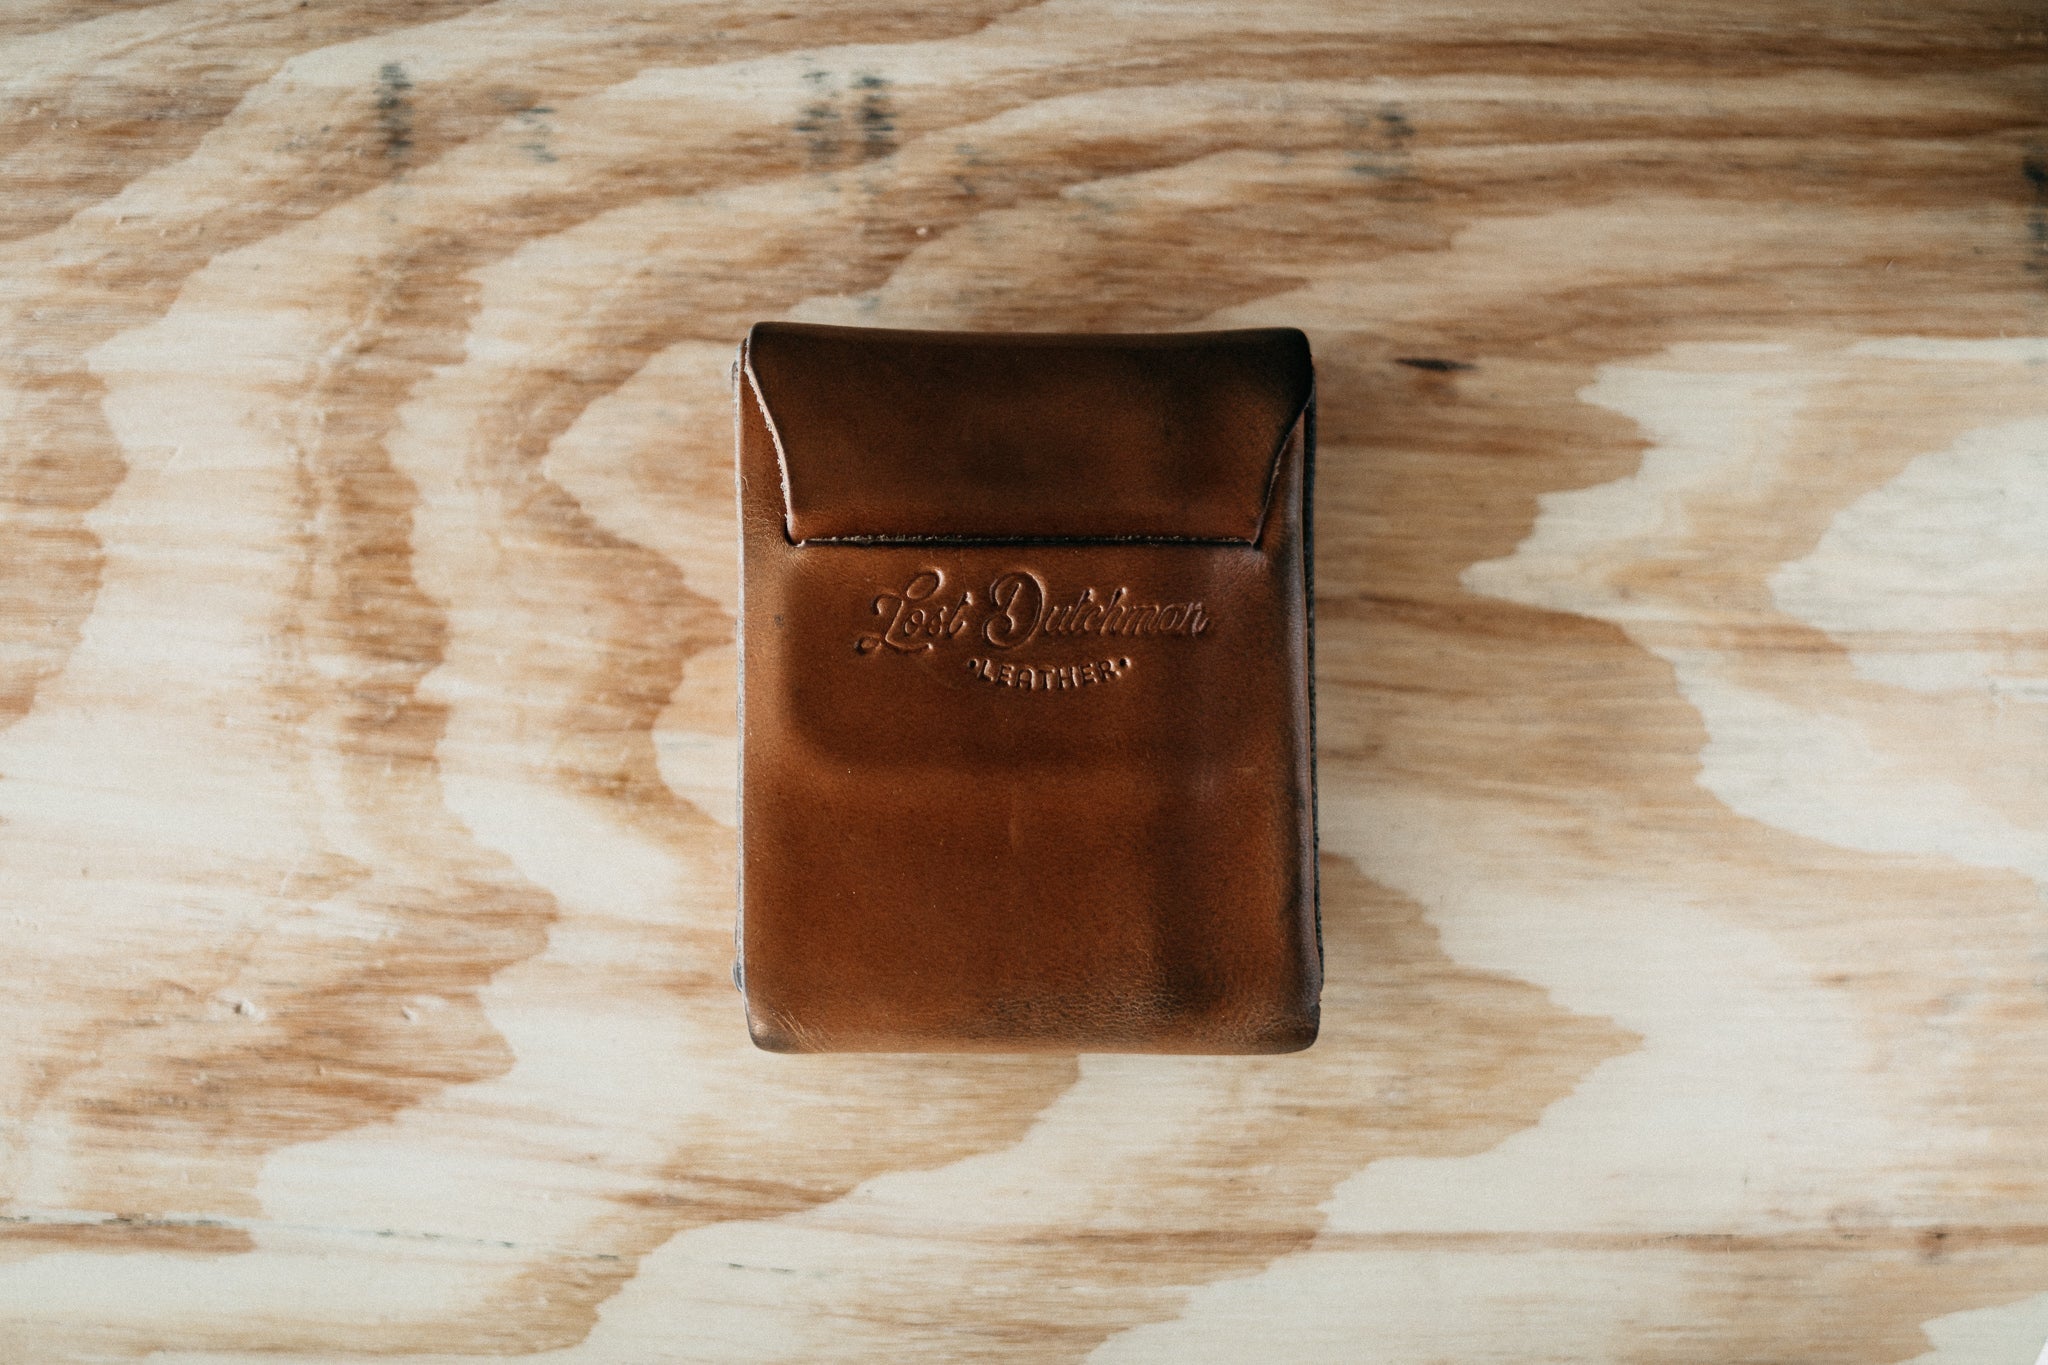 Lost Dutchman Leather - Handcrafted Leather Goods